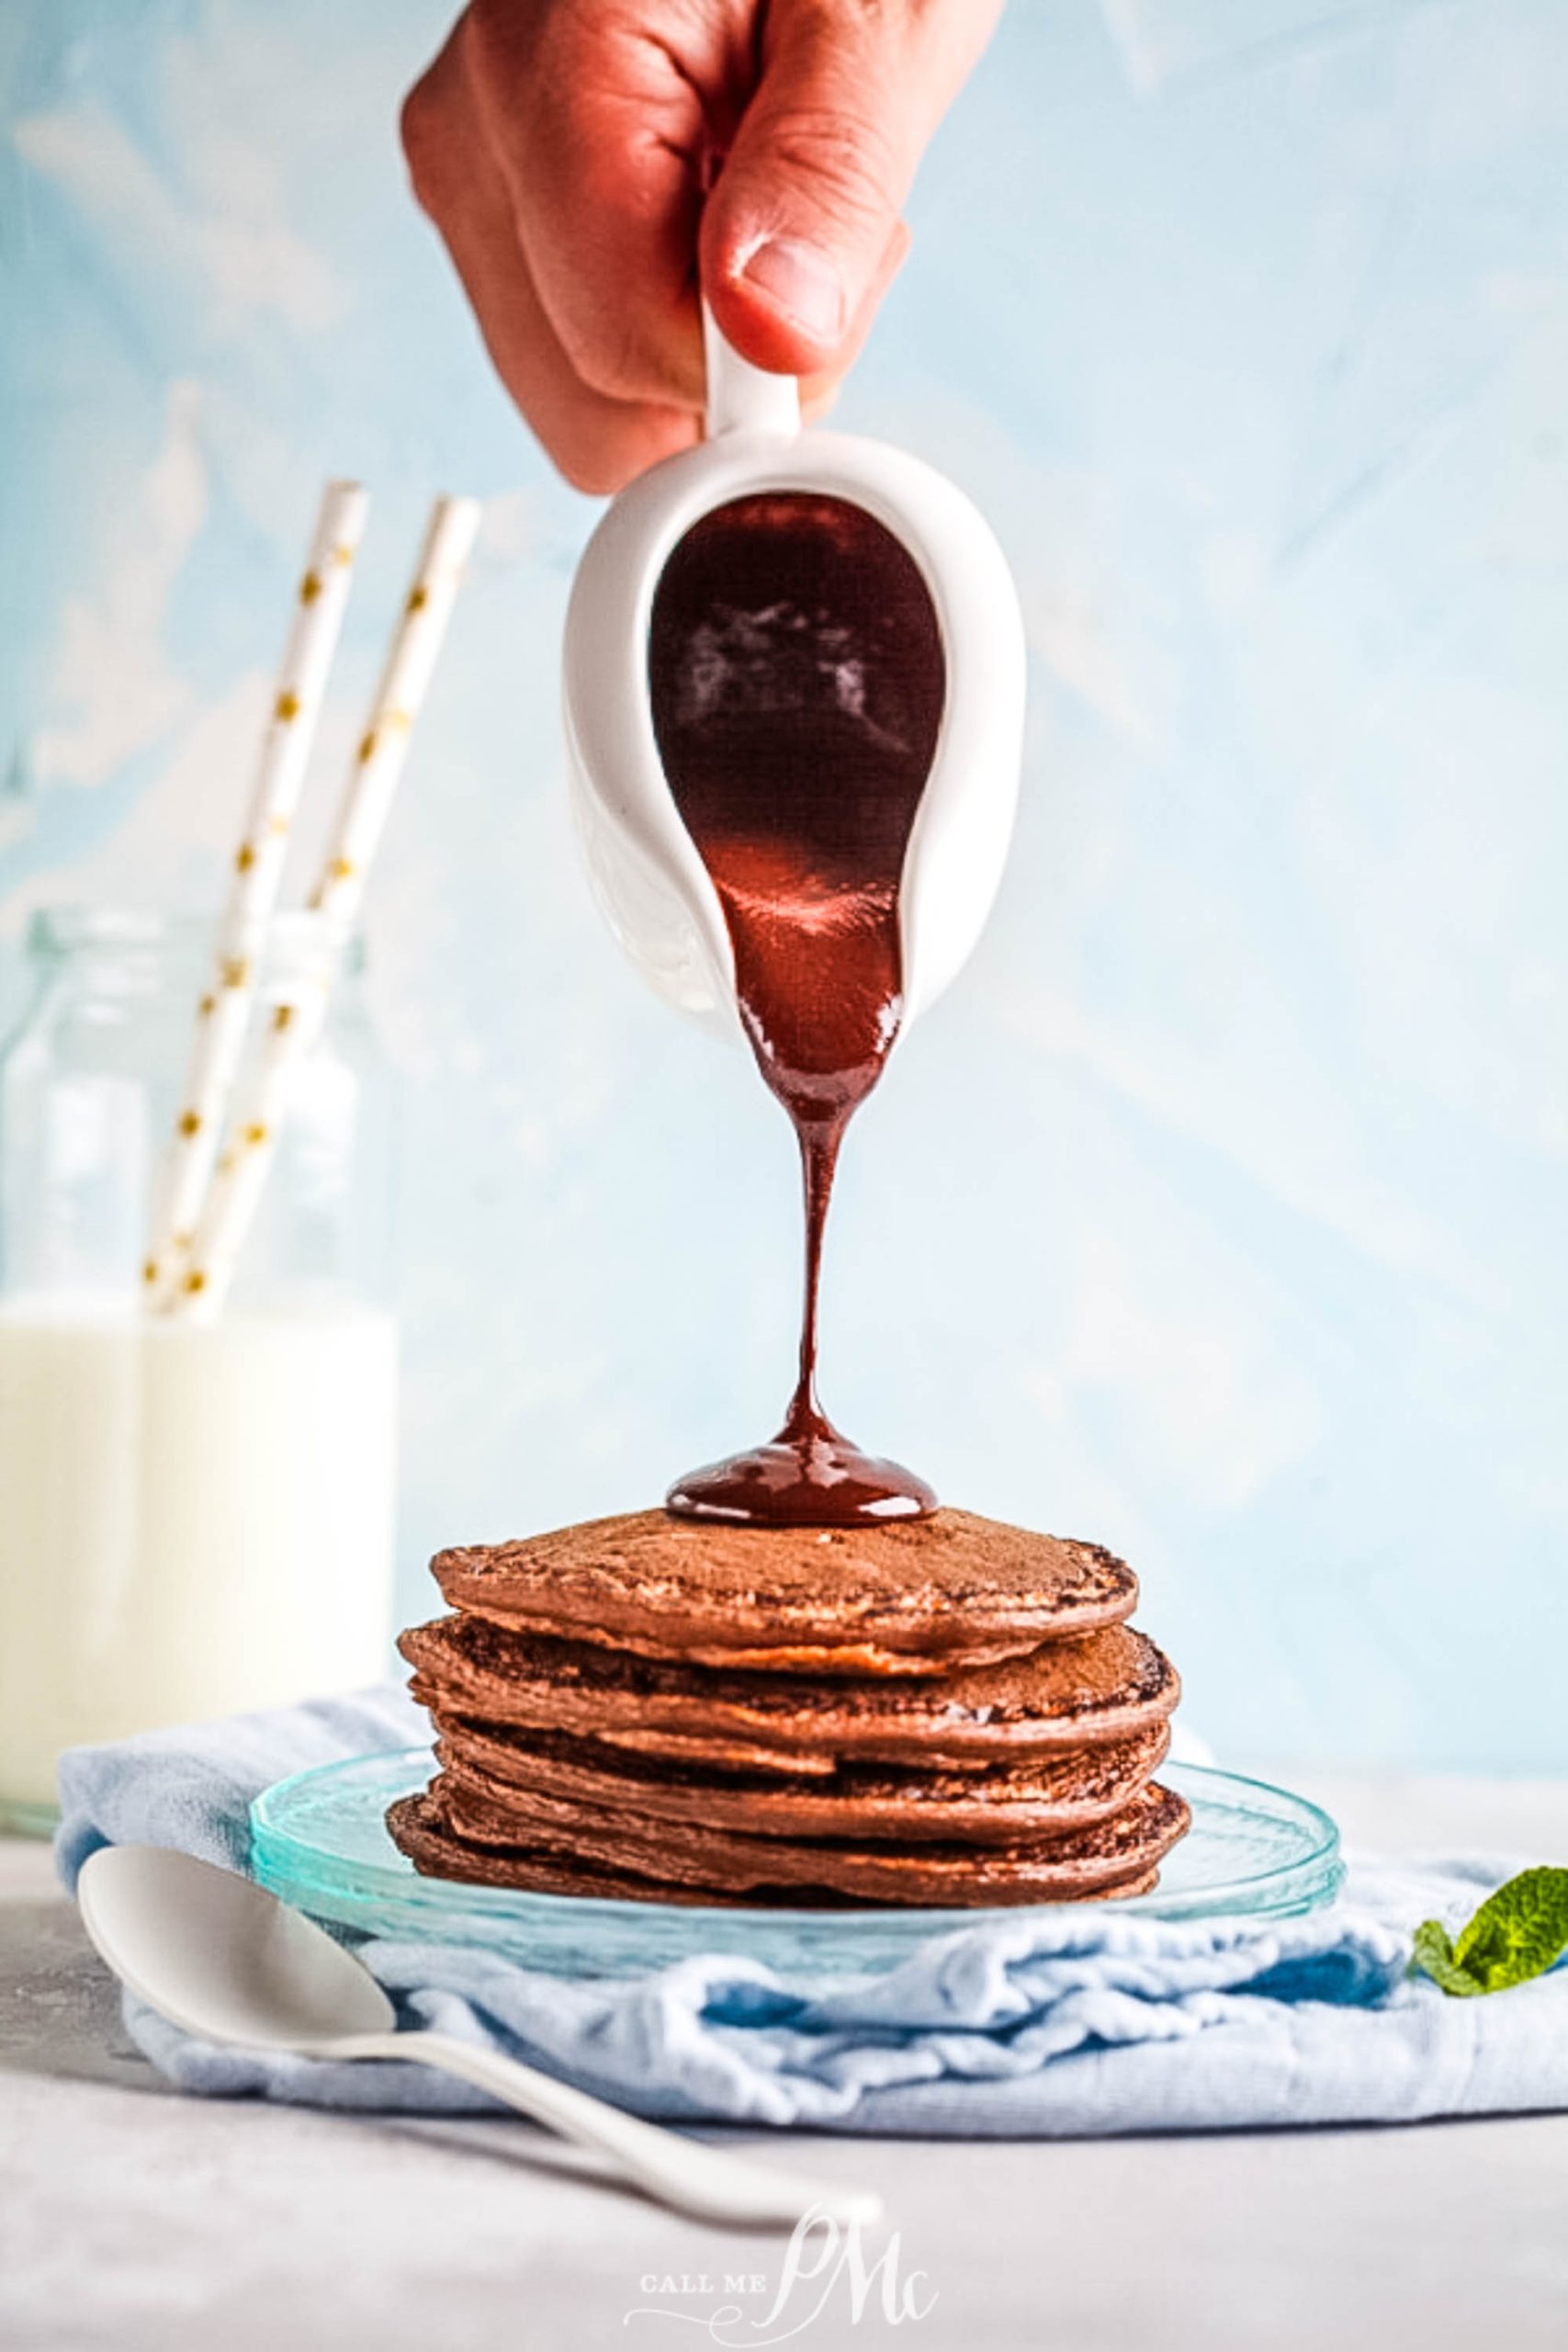 A person pouring chocolate sauce on a stack of pancakes.